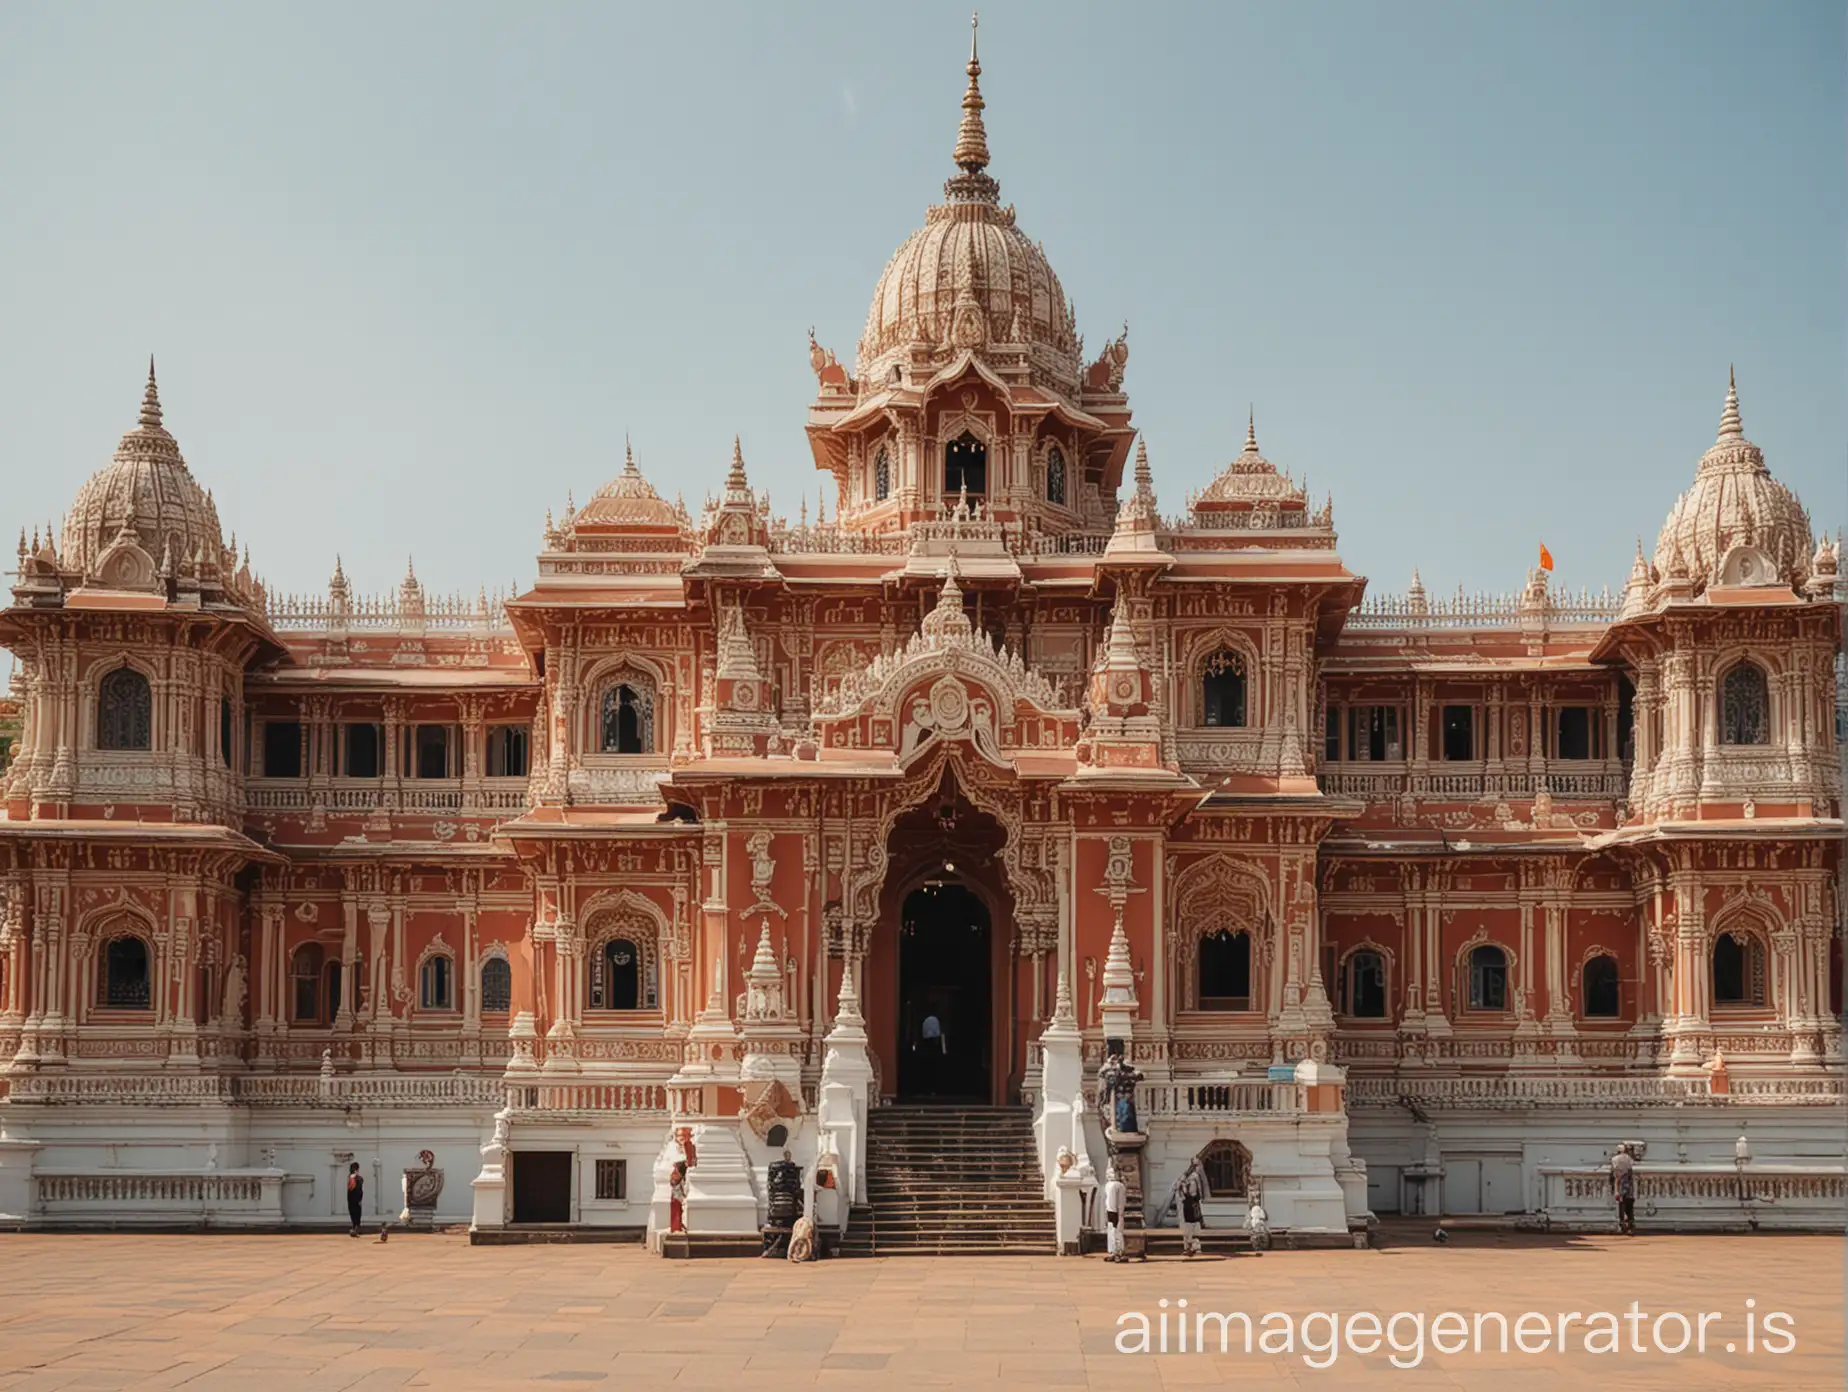 Royal-Hindu-Style-Architecture-Majestic-Building-in-Hindu-Architectural-Style